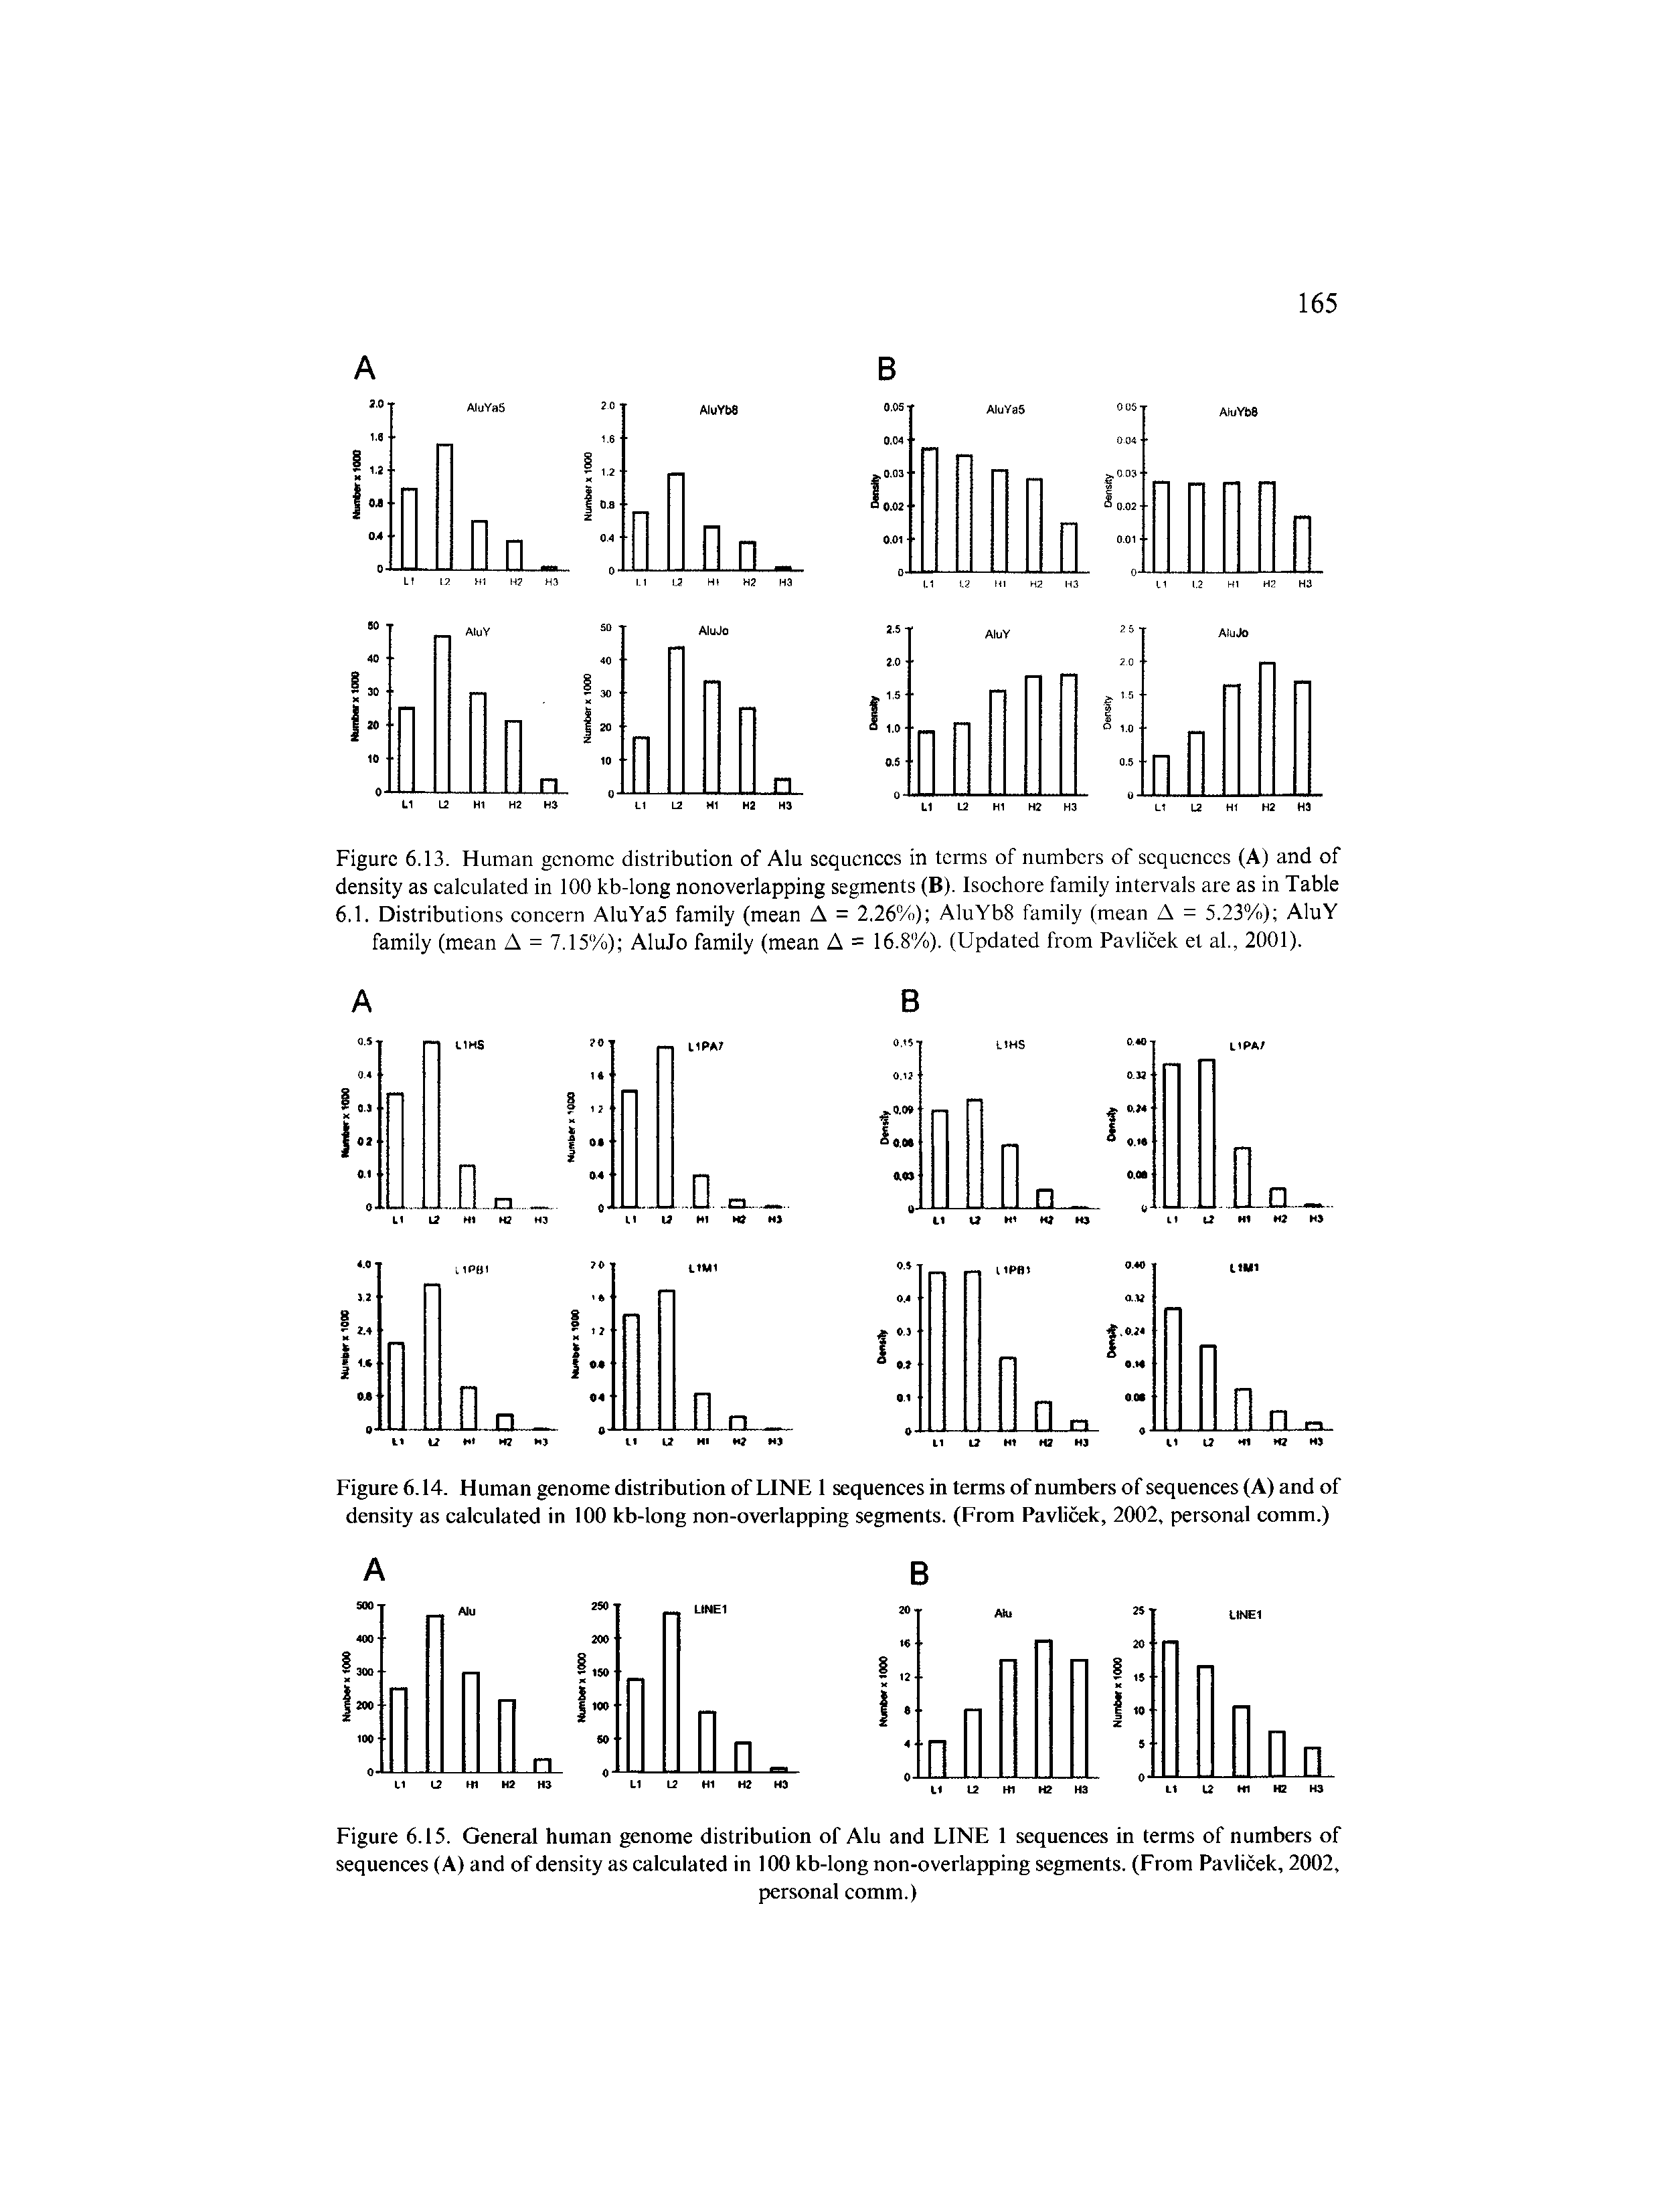 Figure 6.13. Human genome distribution of Alu sequences in terms of numbers of sequenecs (A) and of density as calculated in 100 kb-long nonoverlapping segments (B). Isochore family intervals are as in Table 6.1. Distributions concern AluYa5 family (mean A = 2.26%) AluYbS family (mean A = 5.23%) AluY family (mean A = 7.15%) AluJo family (mean A = 16.8 /o). (Updated from Pavlicek et ah, 2001).